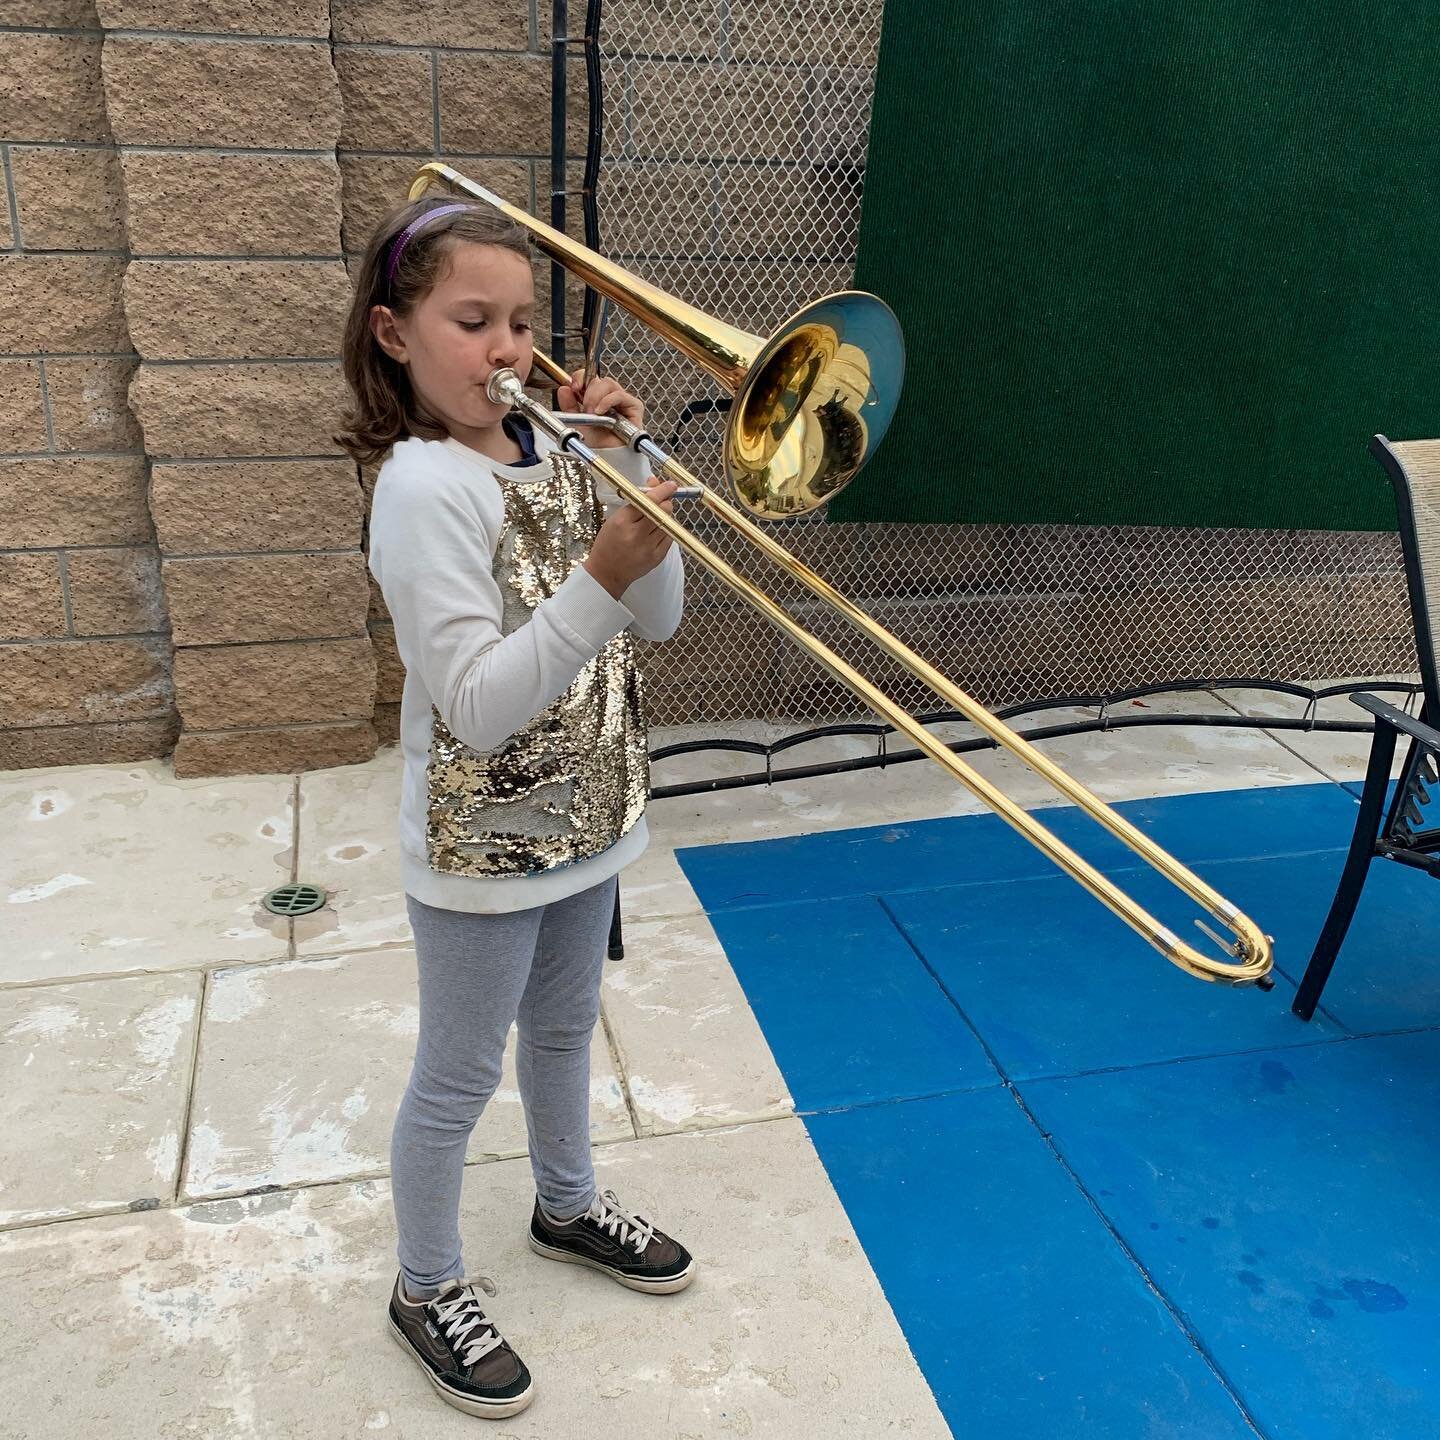 Any parent ever get frustrated that their child doesn't practice their instrument?  It's actually VERY common for kids to love music but not like practicing.  In my experience, the reason most kids don't like to practice is because they don't know ho